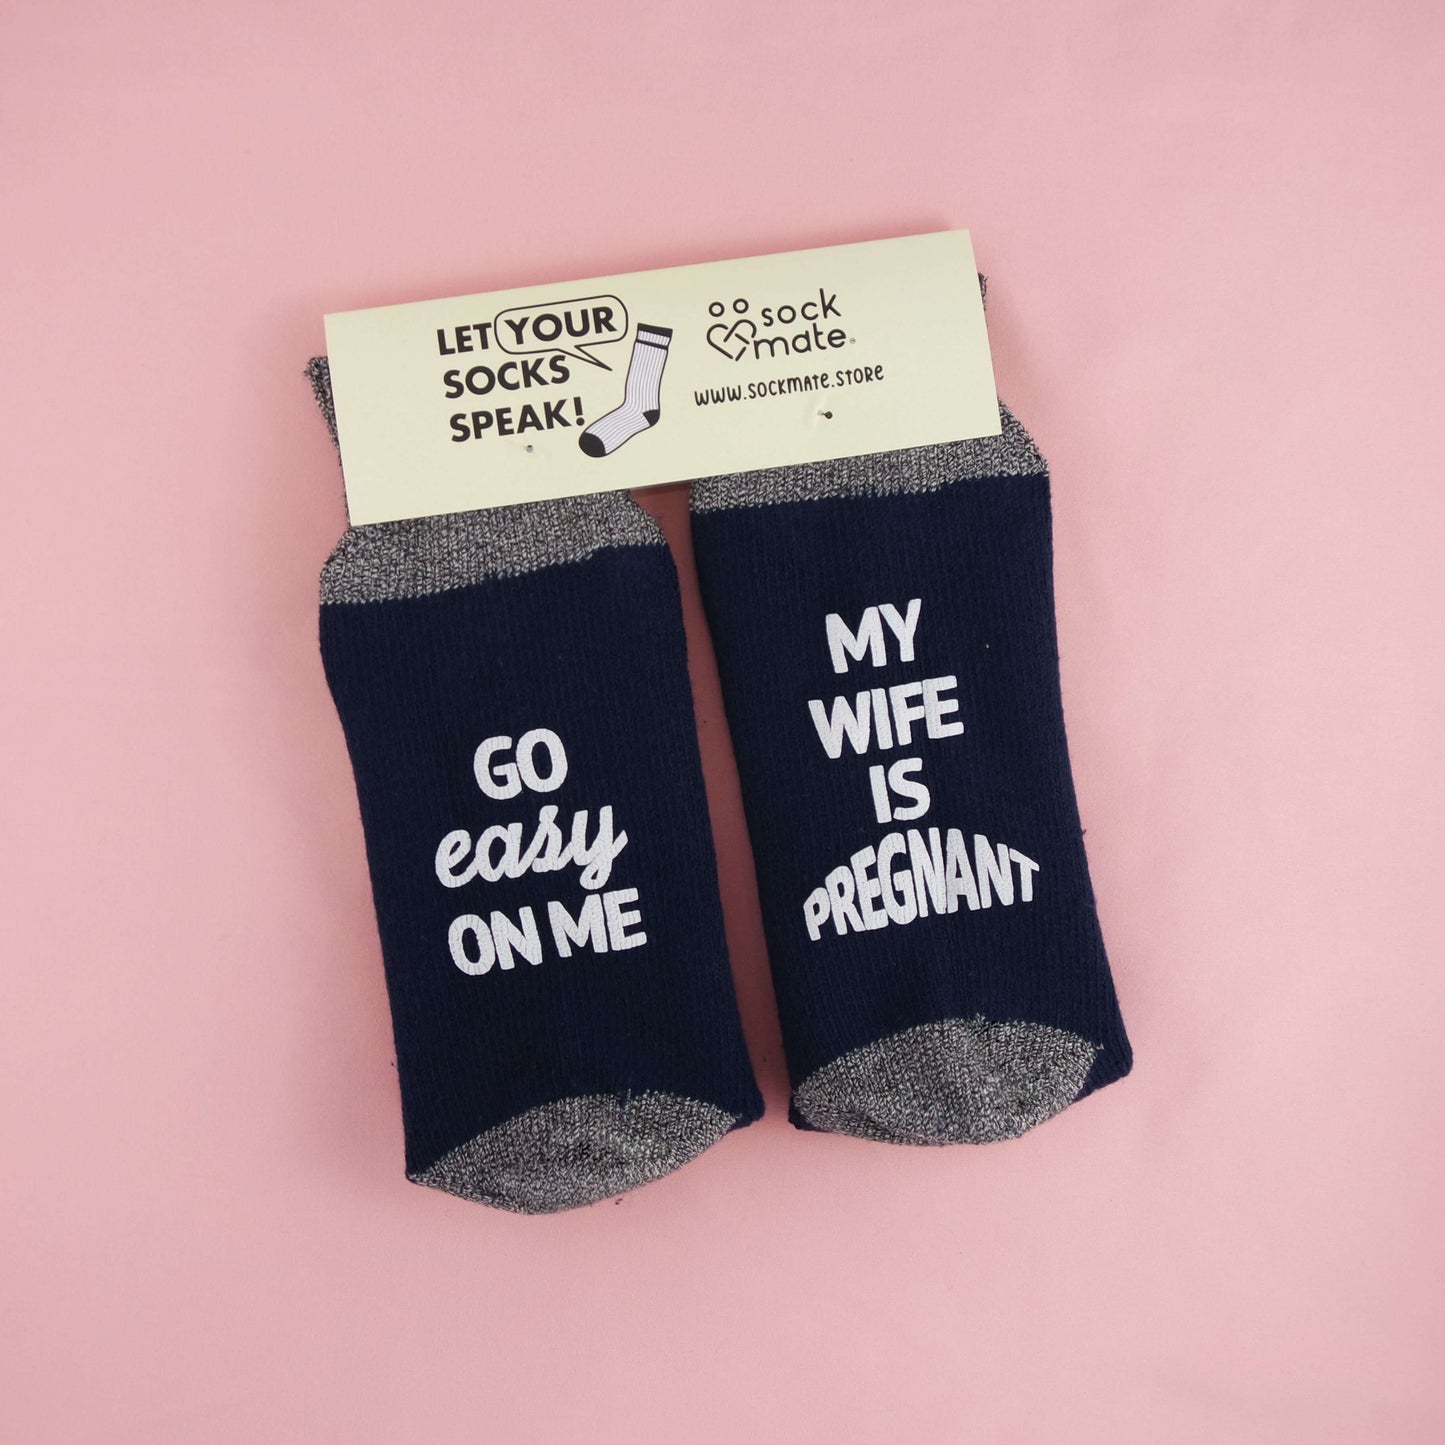 Socks featuring a playful and supportive pregnancy message, encouraging empathy and kindness for expectant fathers with the phrases 'GO EASY ON ME' and 'MY WIFE IS PREGNANT.